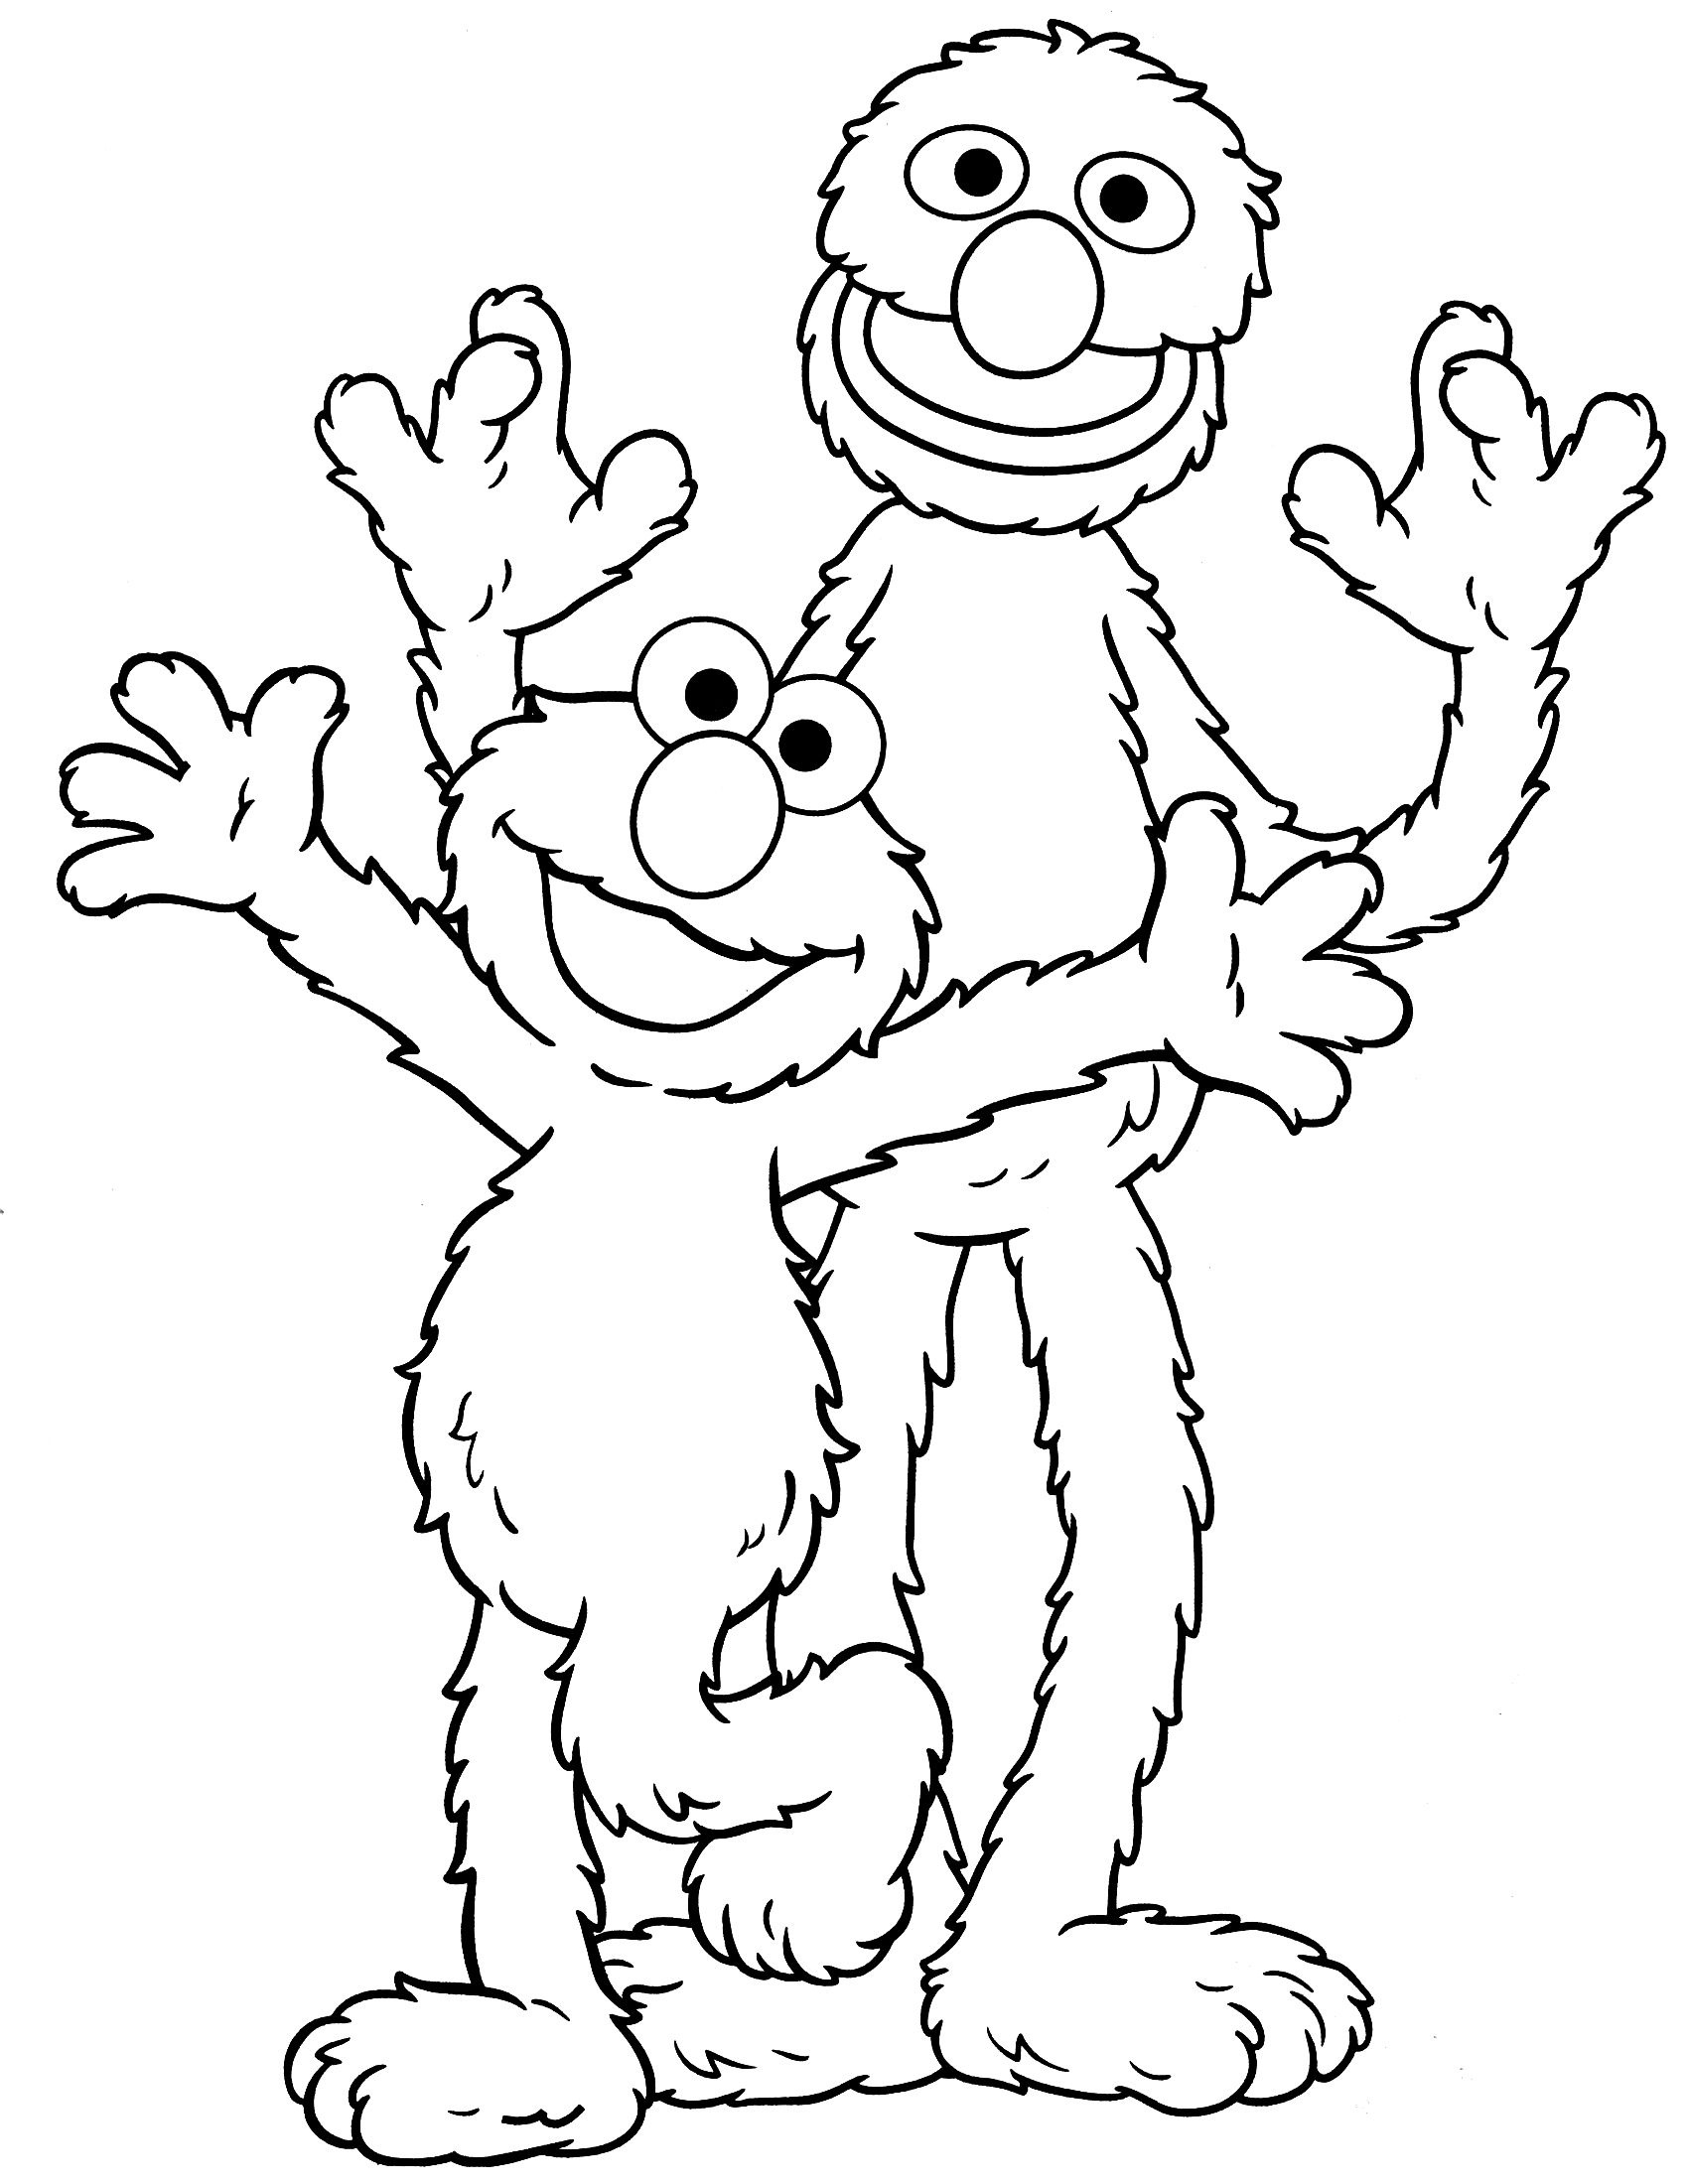 Sesame Street Coloring Pages Bert Free Printable Coloring Pages - Free Printable Coloring Pages Sesame Street Characters